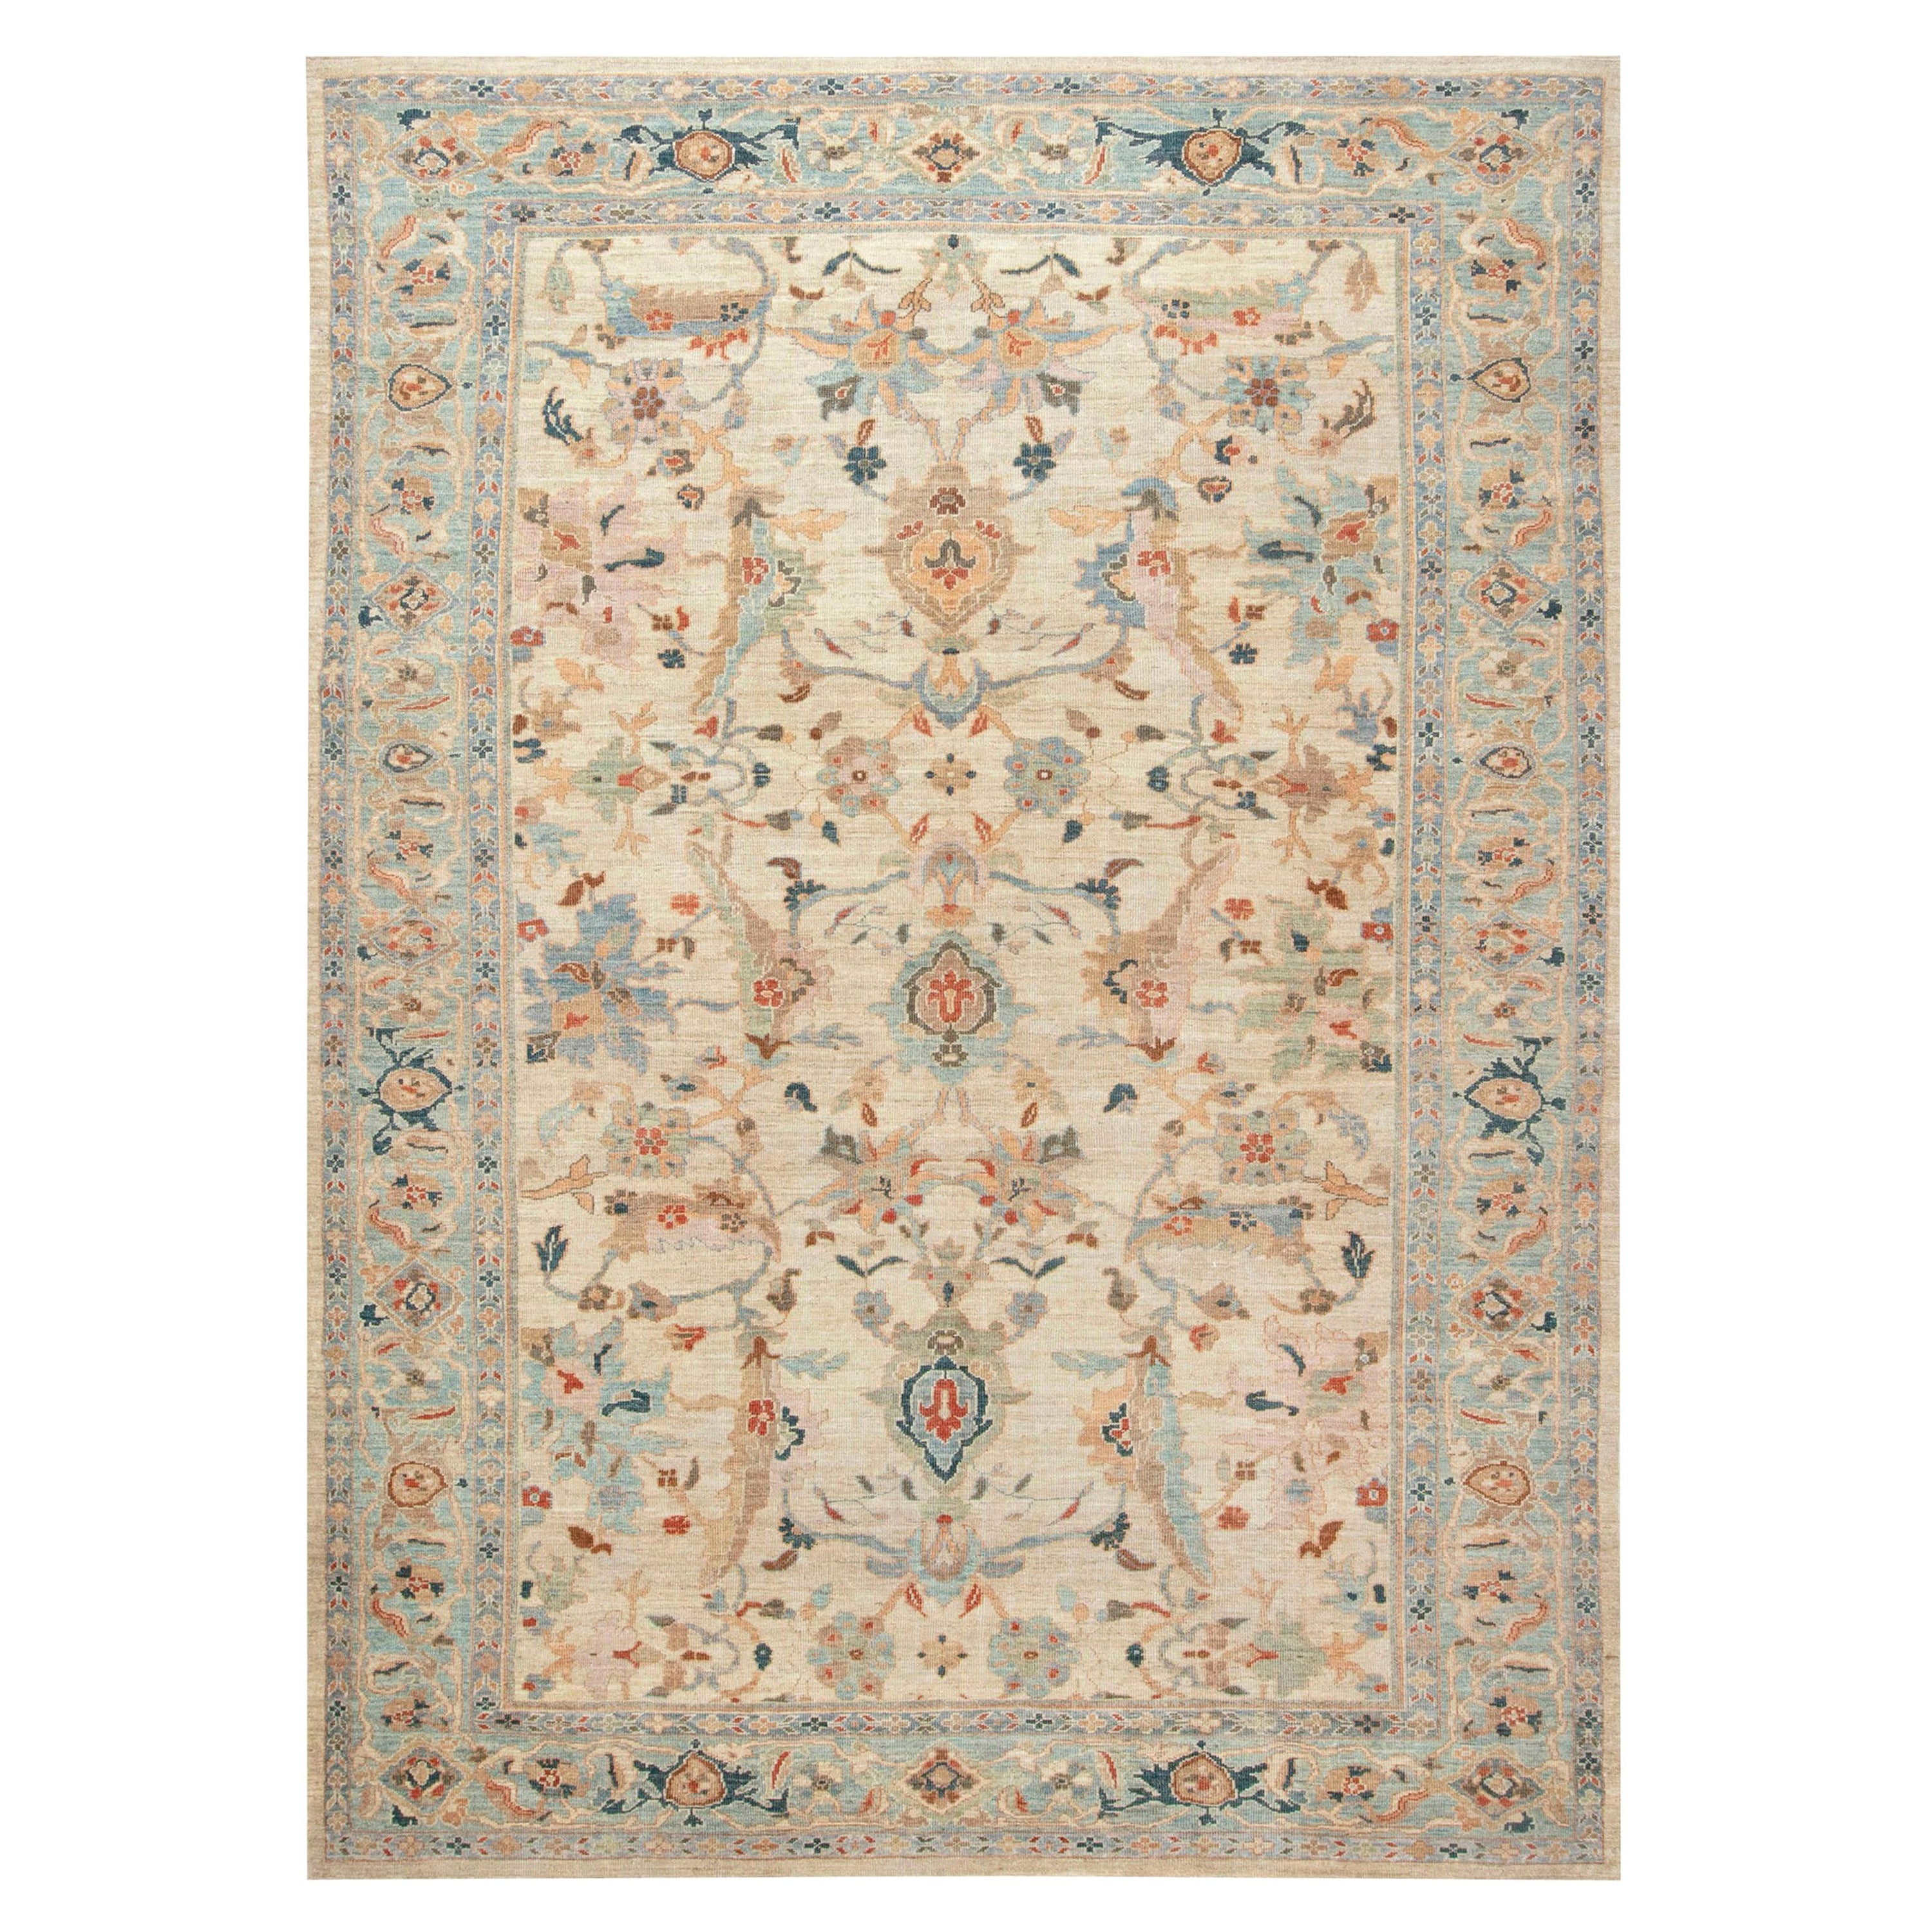 Contemporary Sultanabad Style Handmade Wool Rug by Doris Leslie Blau For Sale